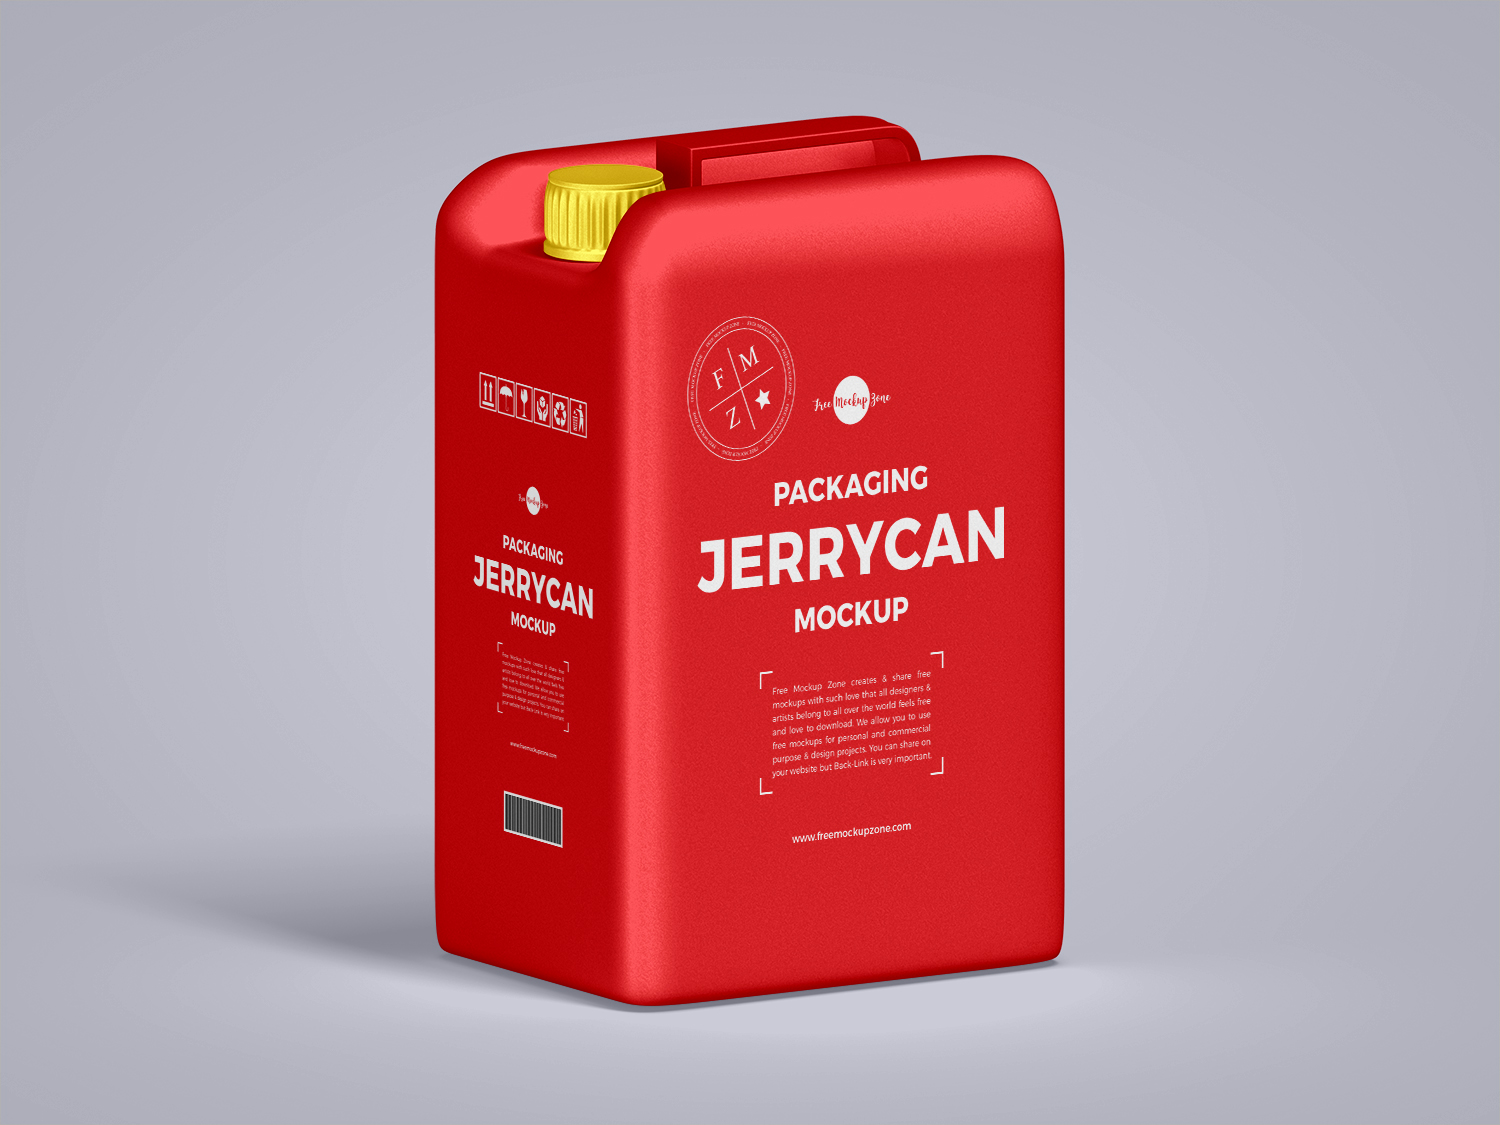 Free Jerrycan Packaging Mockup